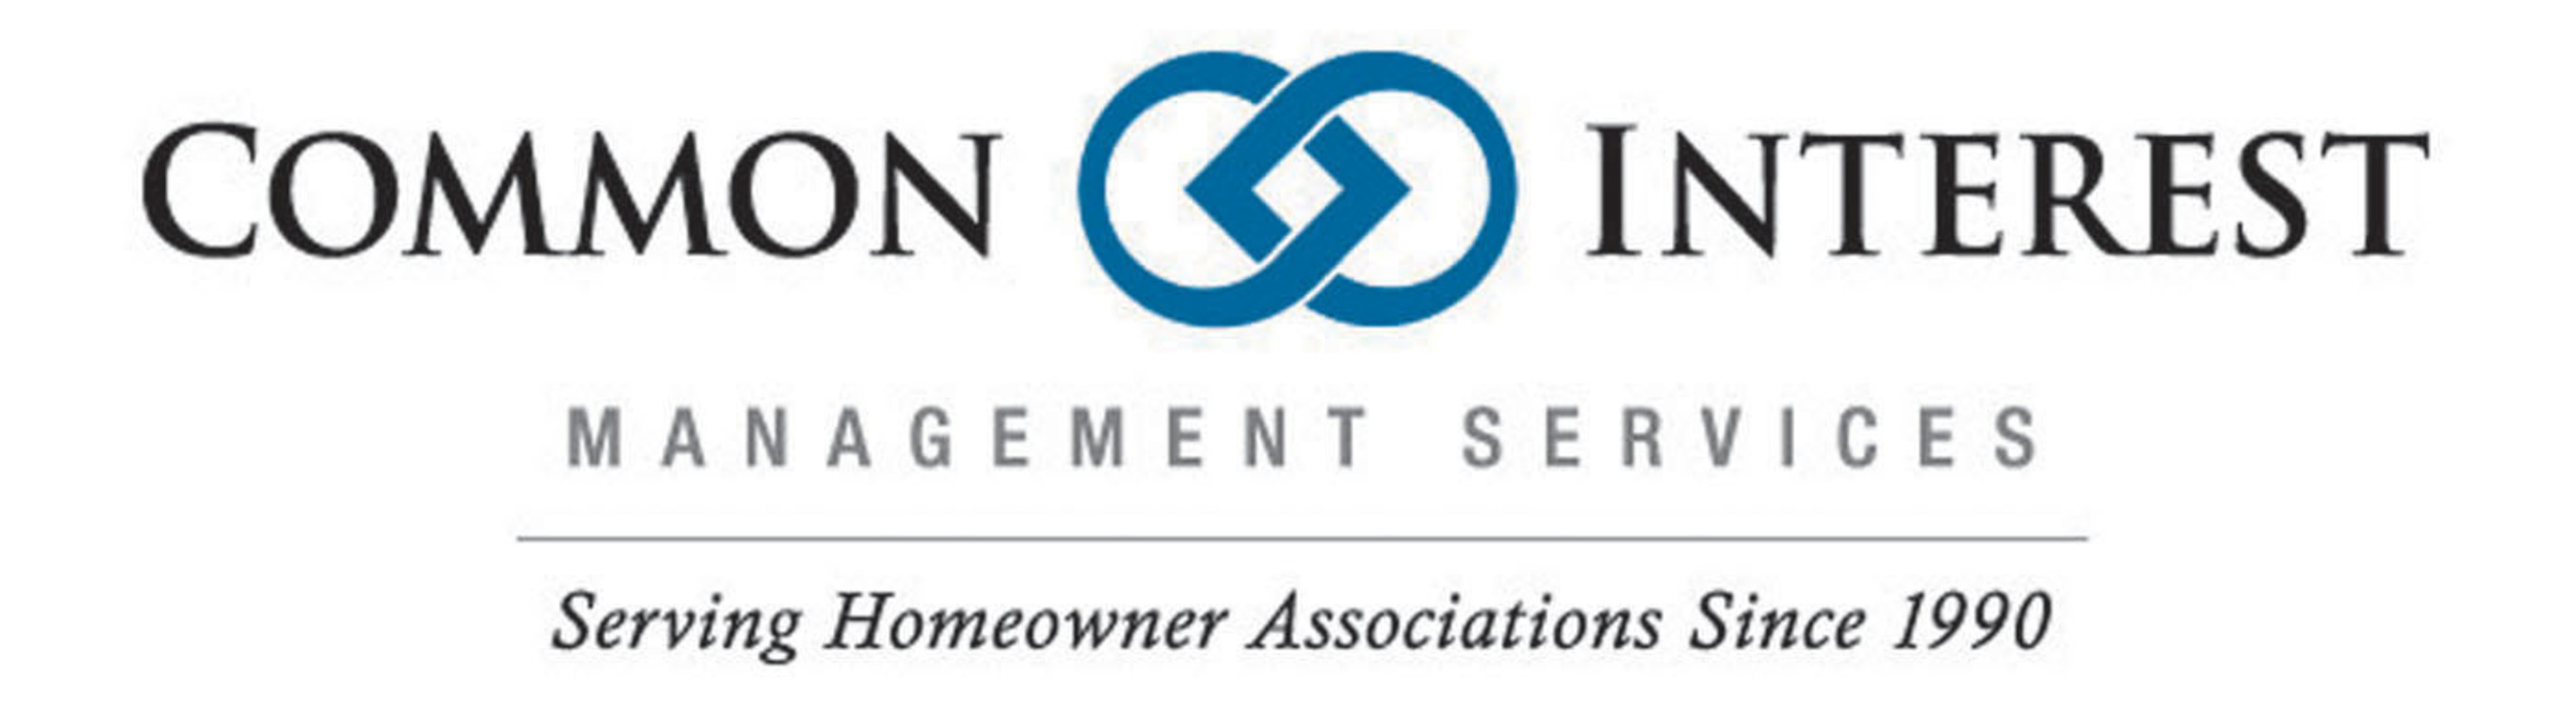 Founded in 1990, Common Interest Management is a leading provider of professional association management services to homeowners associations (HOAs) throughout the Bay Area with offices in Danville, San Mateo and Campbell. Common Interest Management specializes in the management of master-planned, single family home, condominium, mixed use residential and mid-rise communities and now serves more than 240 communities in Northern California. (PRNewsFoto/Common Interest Management Services) (PRNewsFoto/COMMON INTEREST MANAGEMENT...)